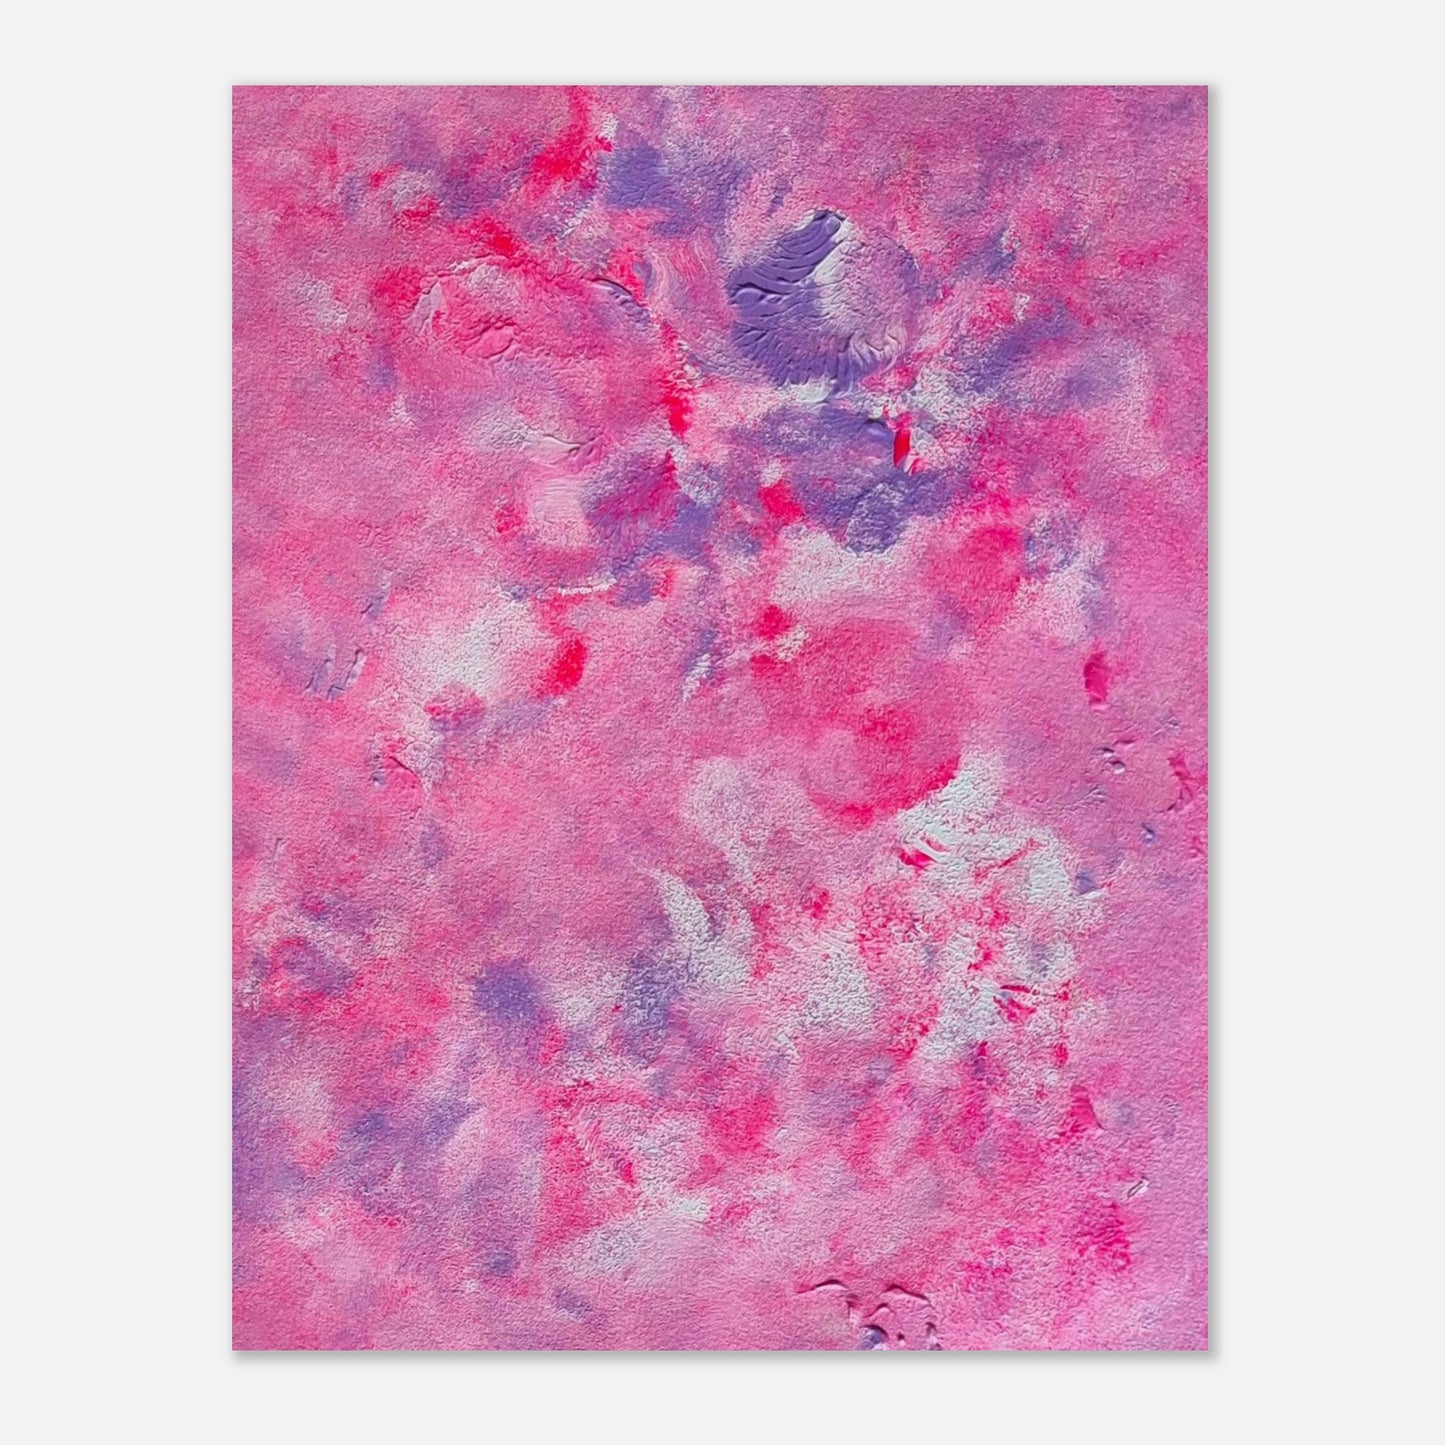 Pink, purple and white abstract art poster on a white background